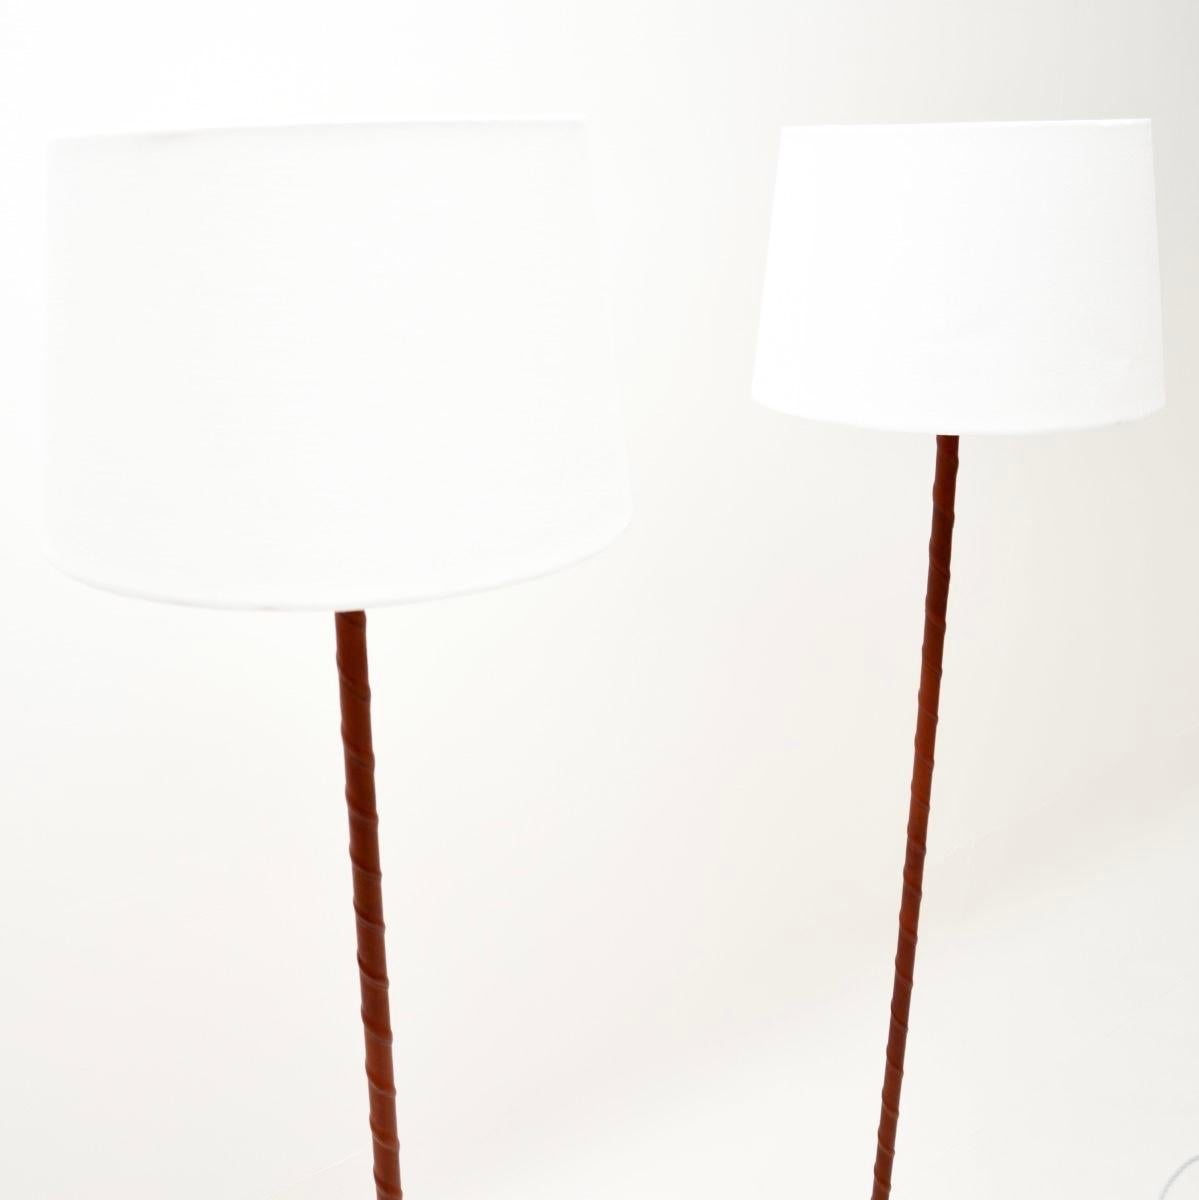 A stylish and extremely well made pair of vintage Swedish leather bound floor lamps. They were recently imported from Sweden, they date from the 1970’s.

The quality is outstanding, the metal shafts are beautifully wrapped in twisted brown leather,